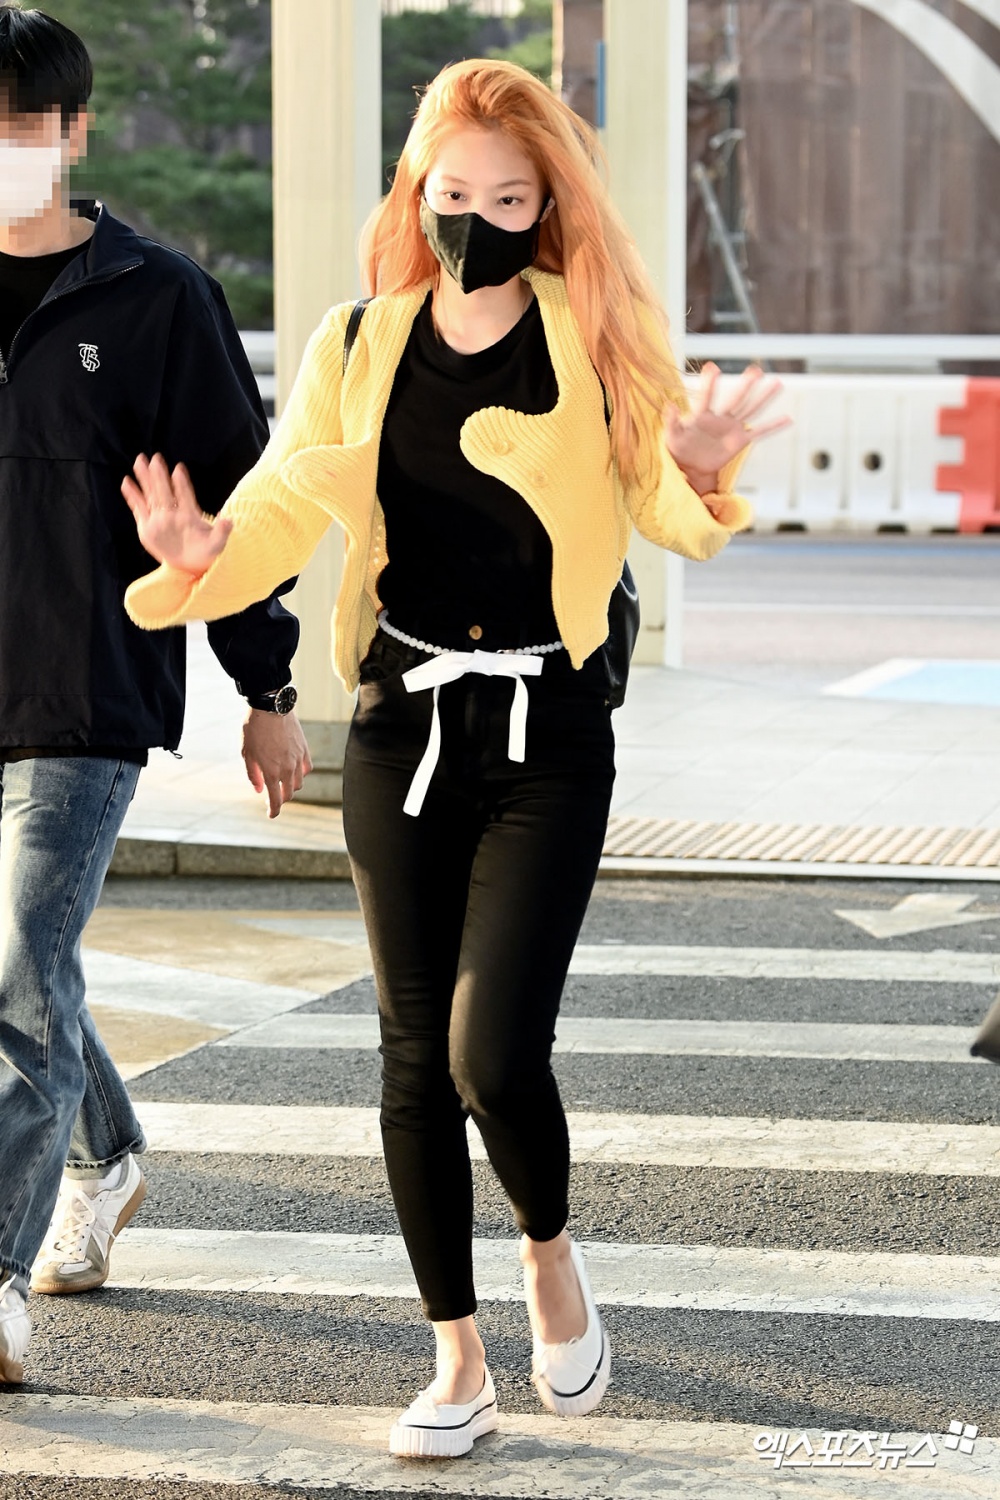 Arriba 72+ imagen jennie outfit airport - Abzlocal.mx